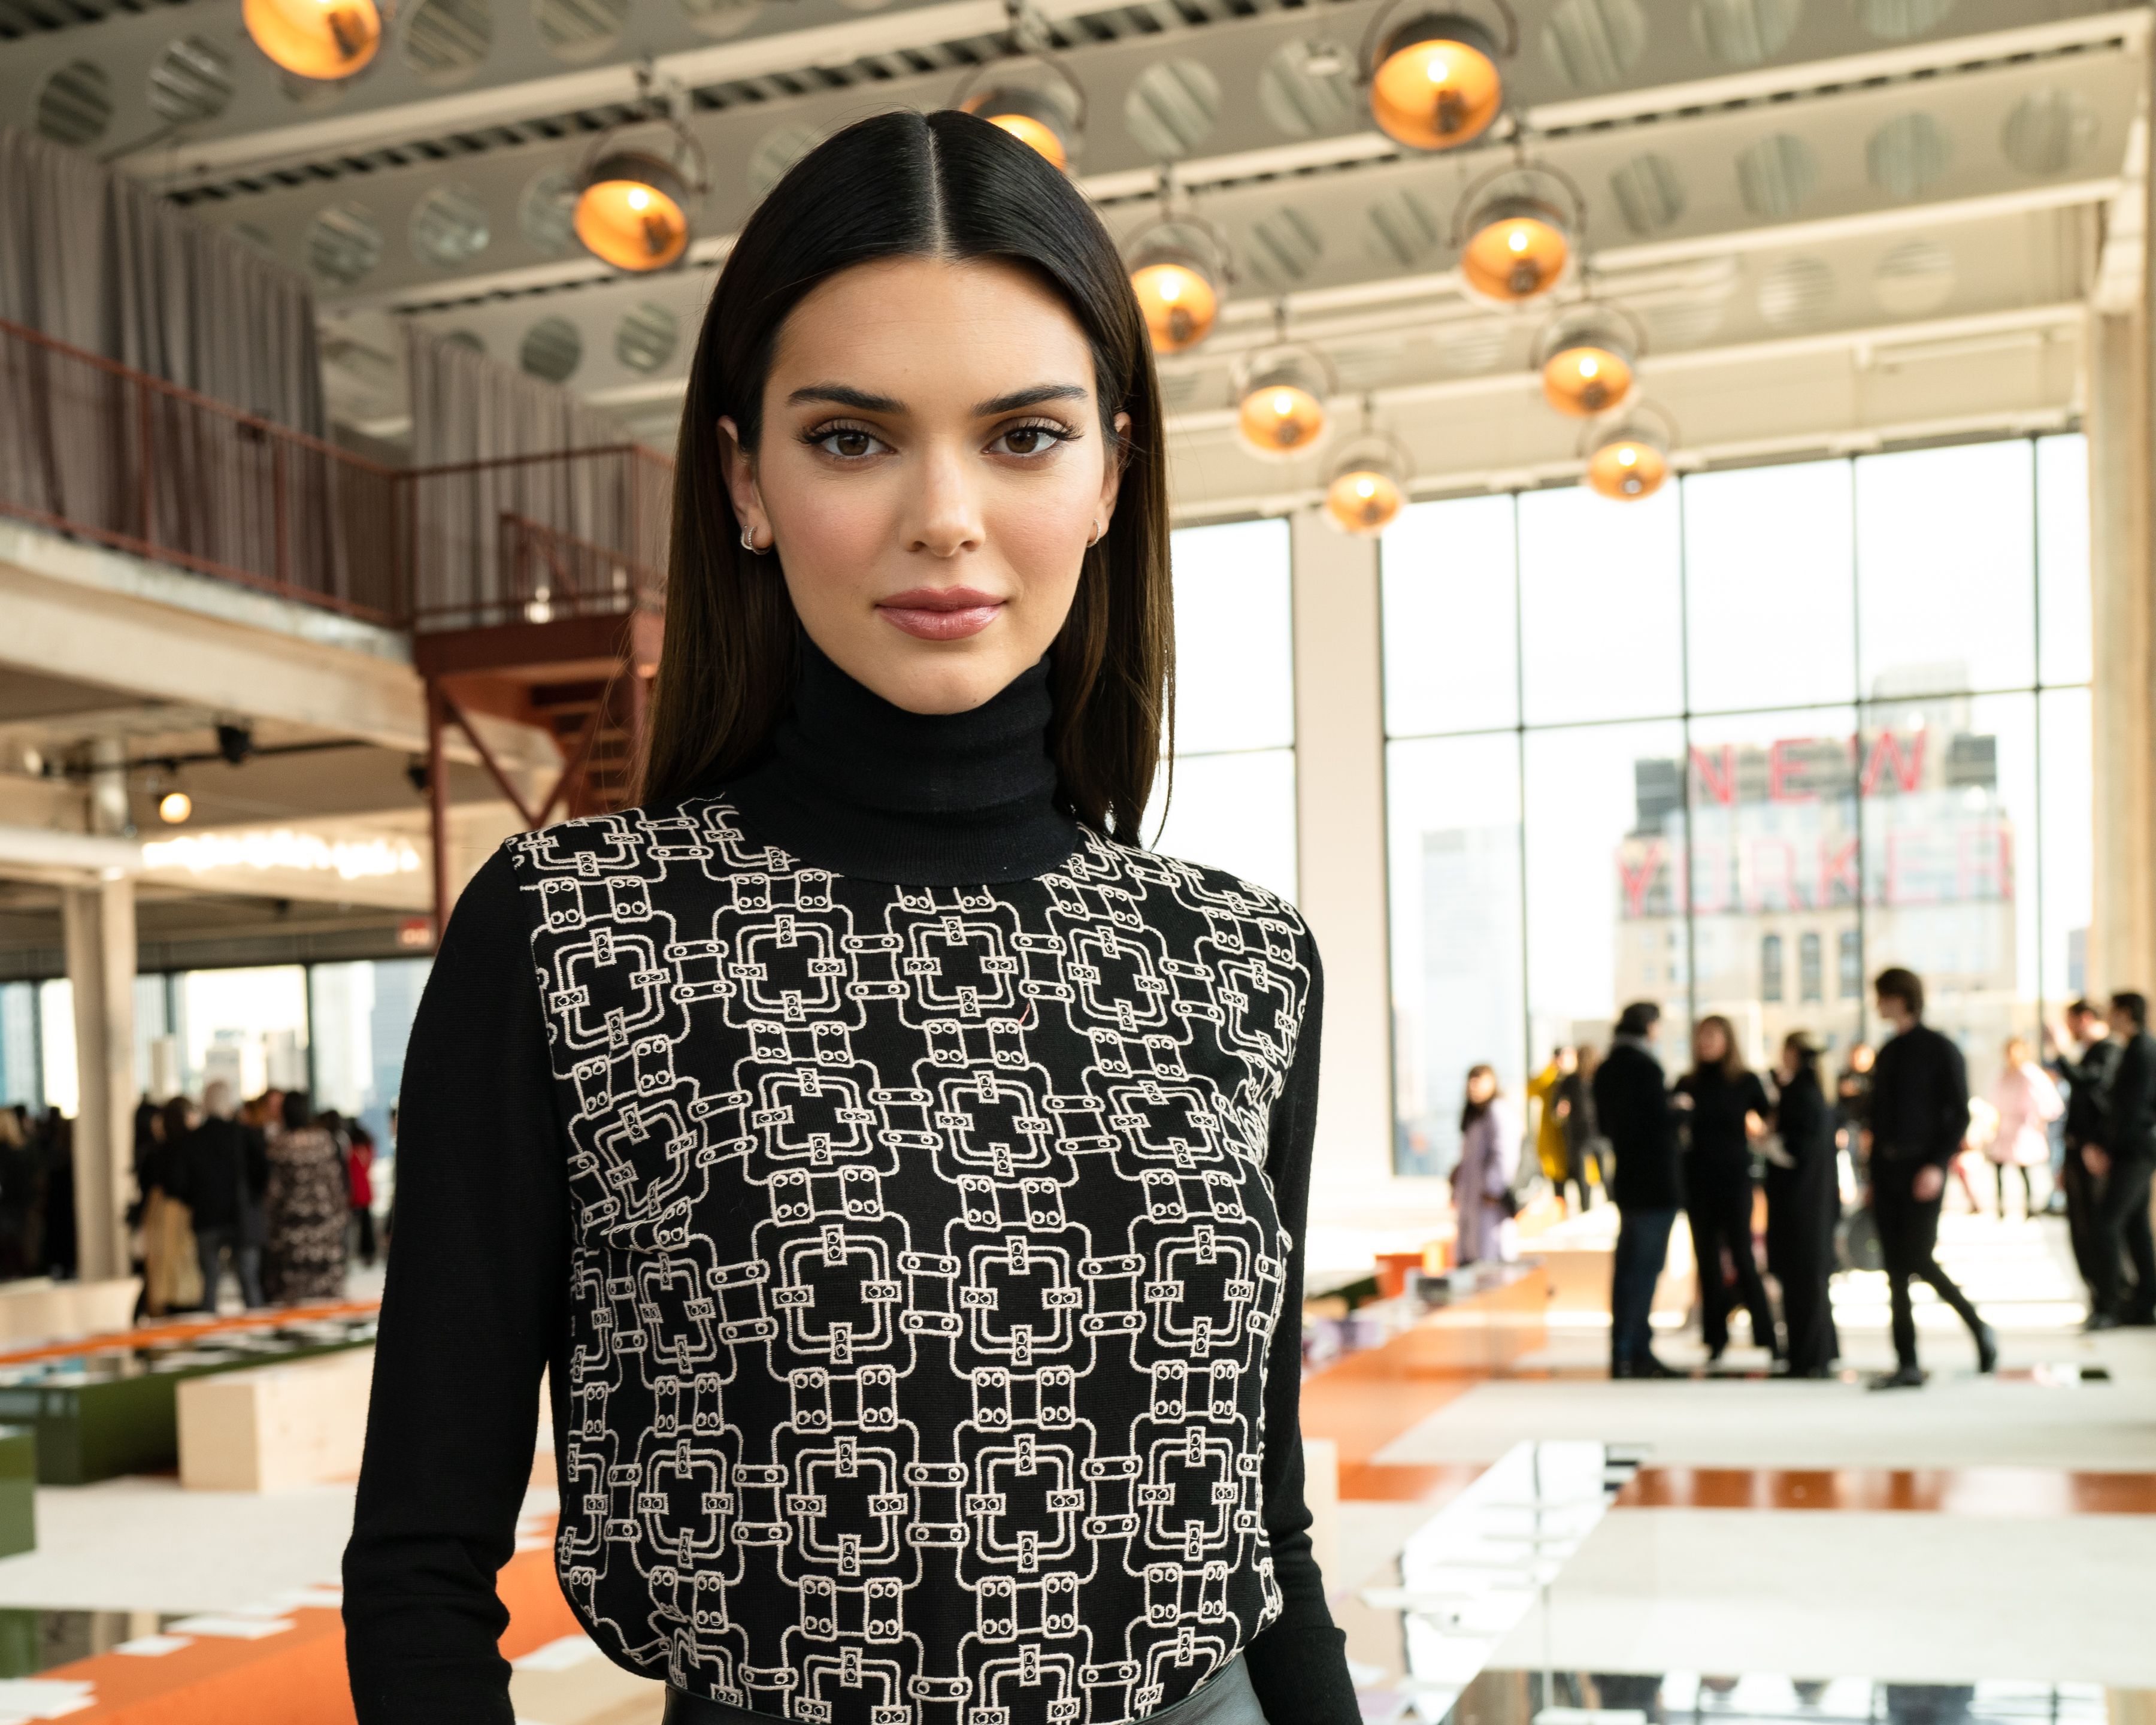 Longchamp - Kendall Jenner is the epitome of an iconic